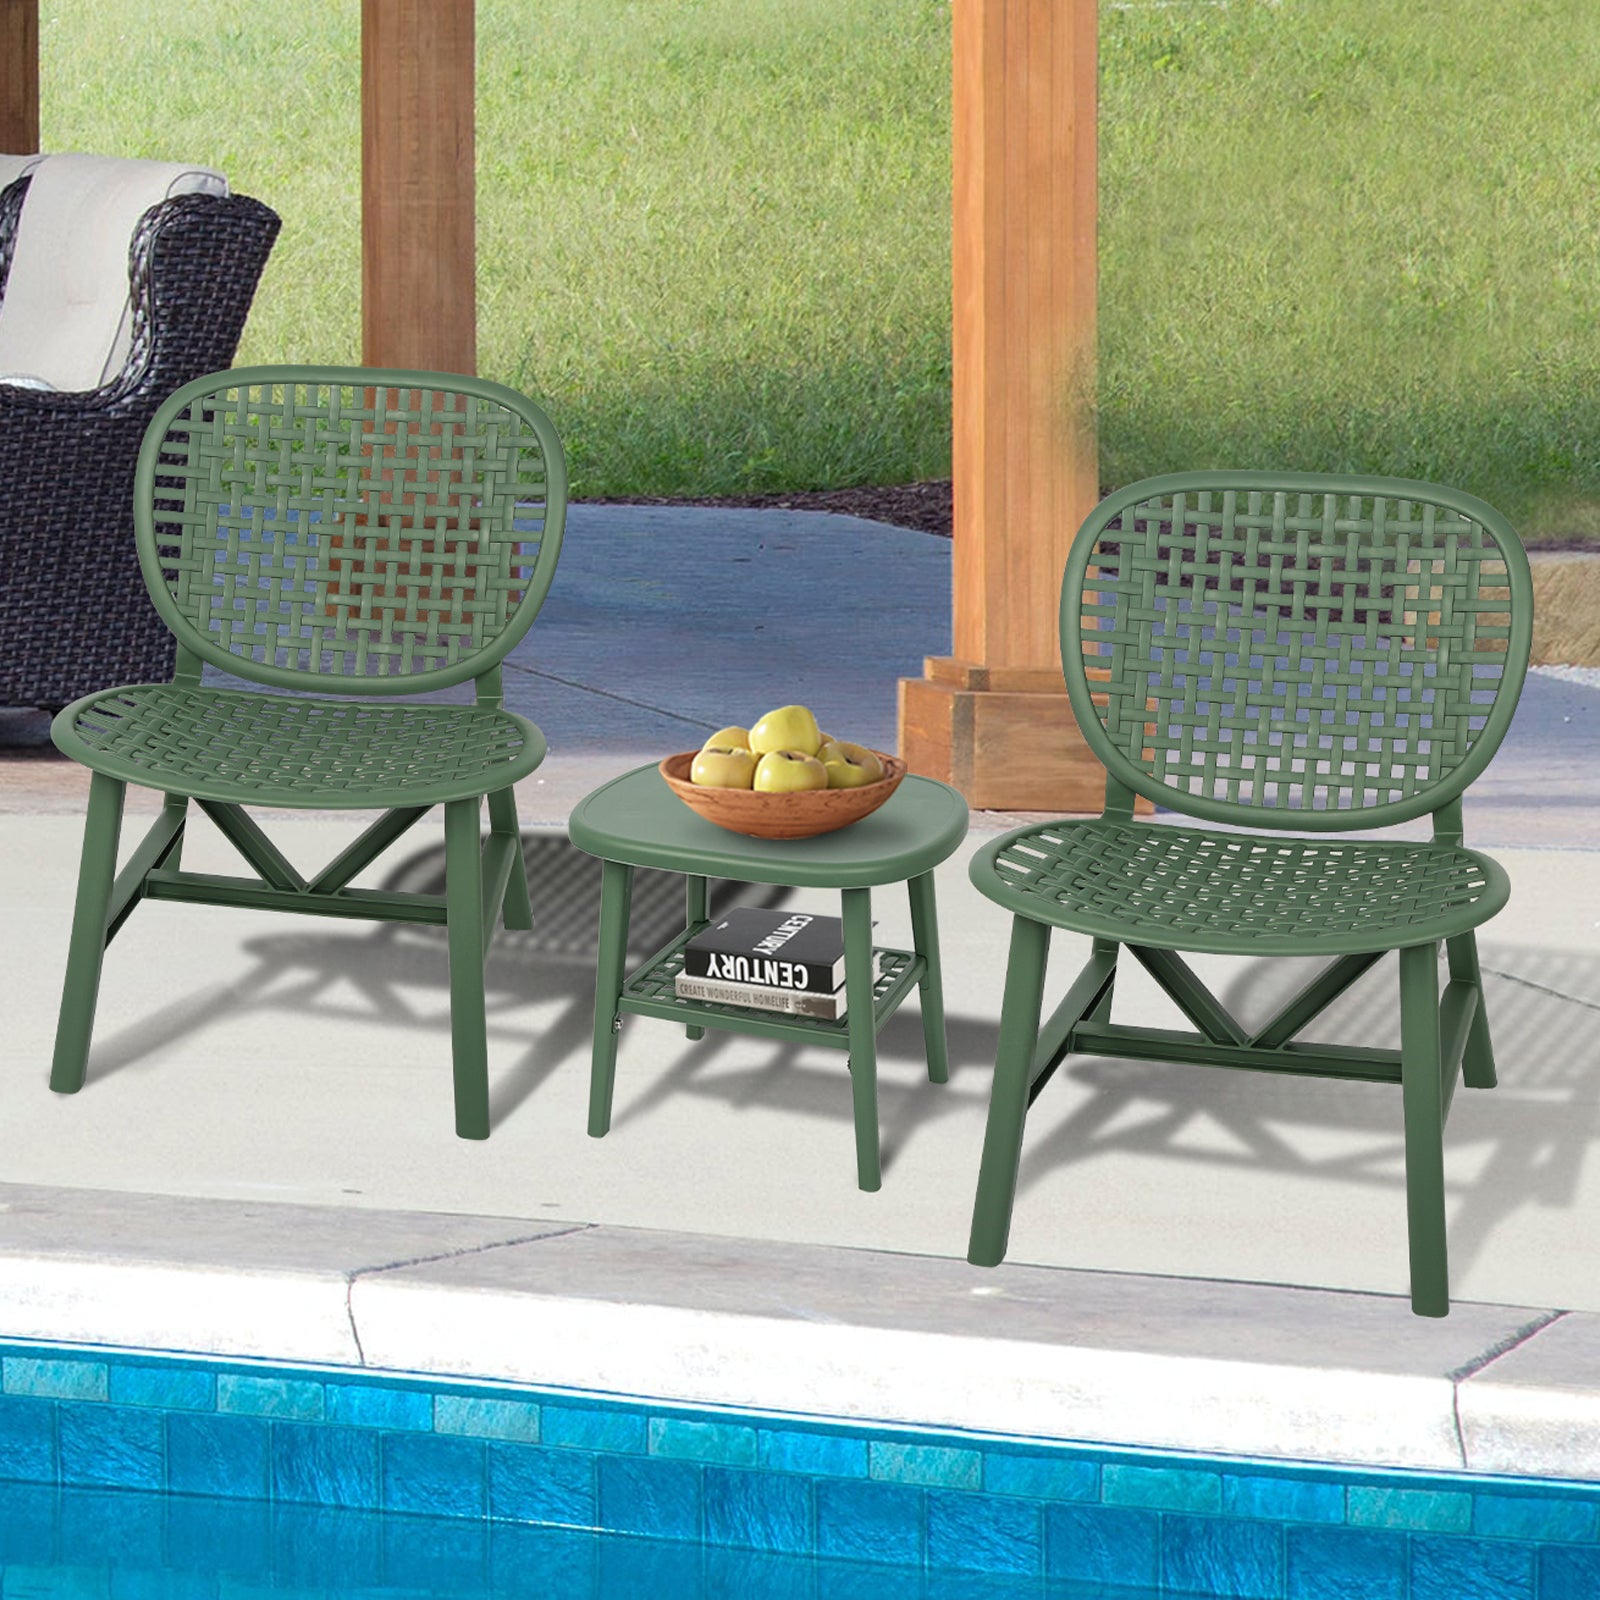 3 Piece Hollow Design Retro Outdoor Patio Table and Lounge Chairs Furniture Set with Open Shelf and Widened Seats (Green)